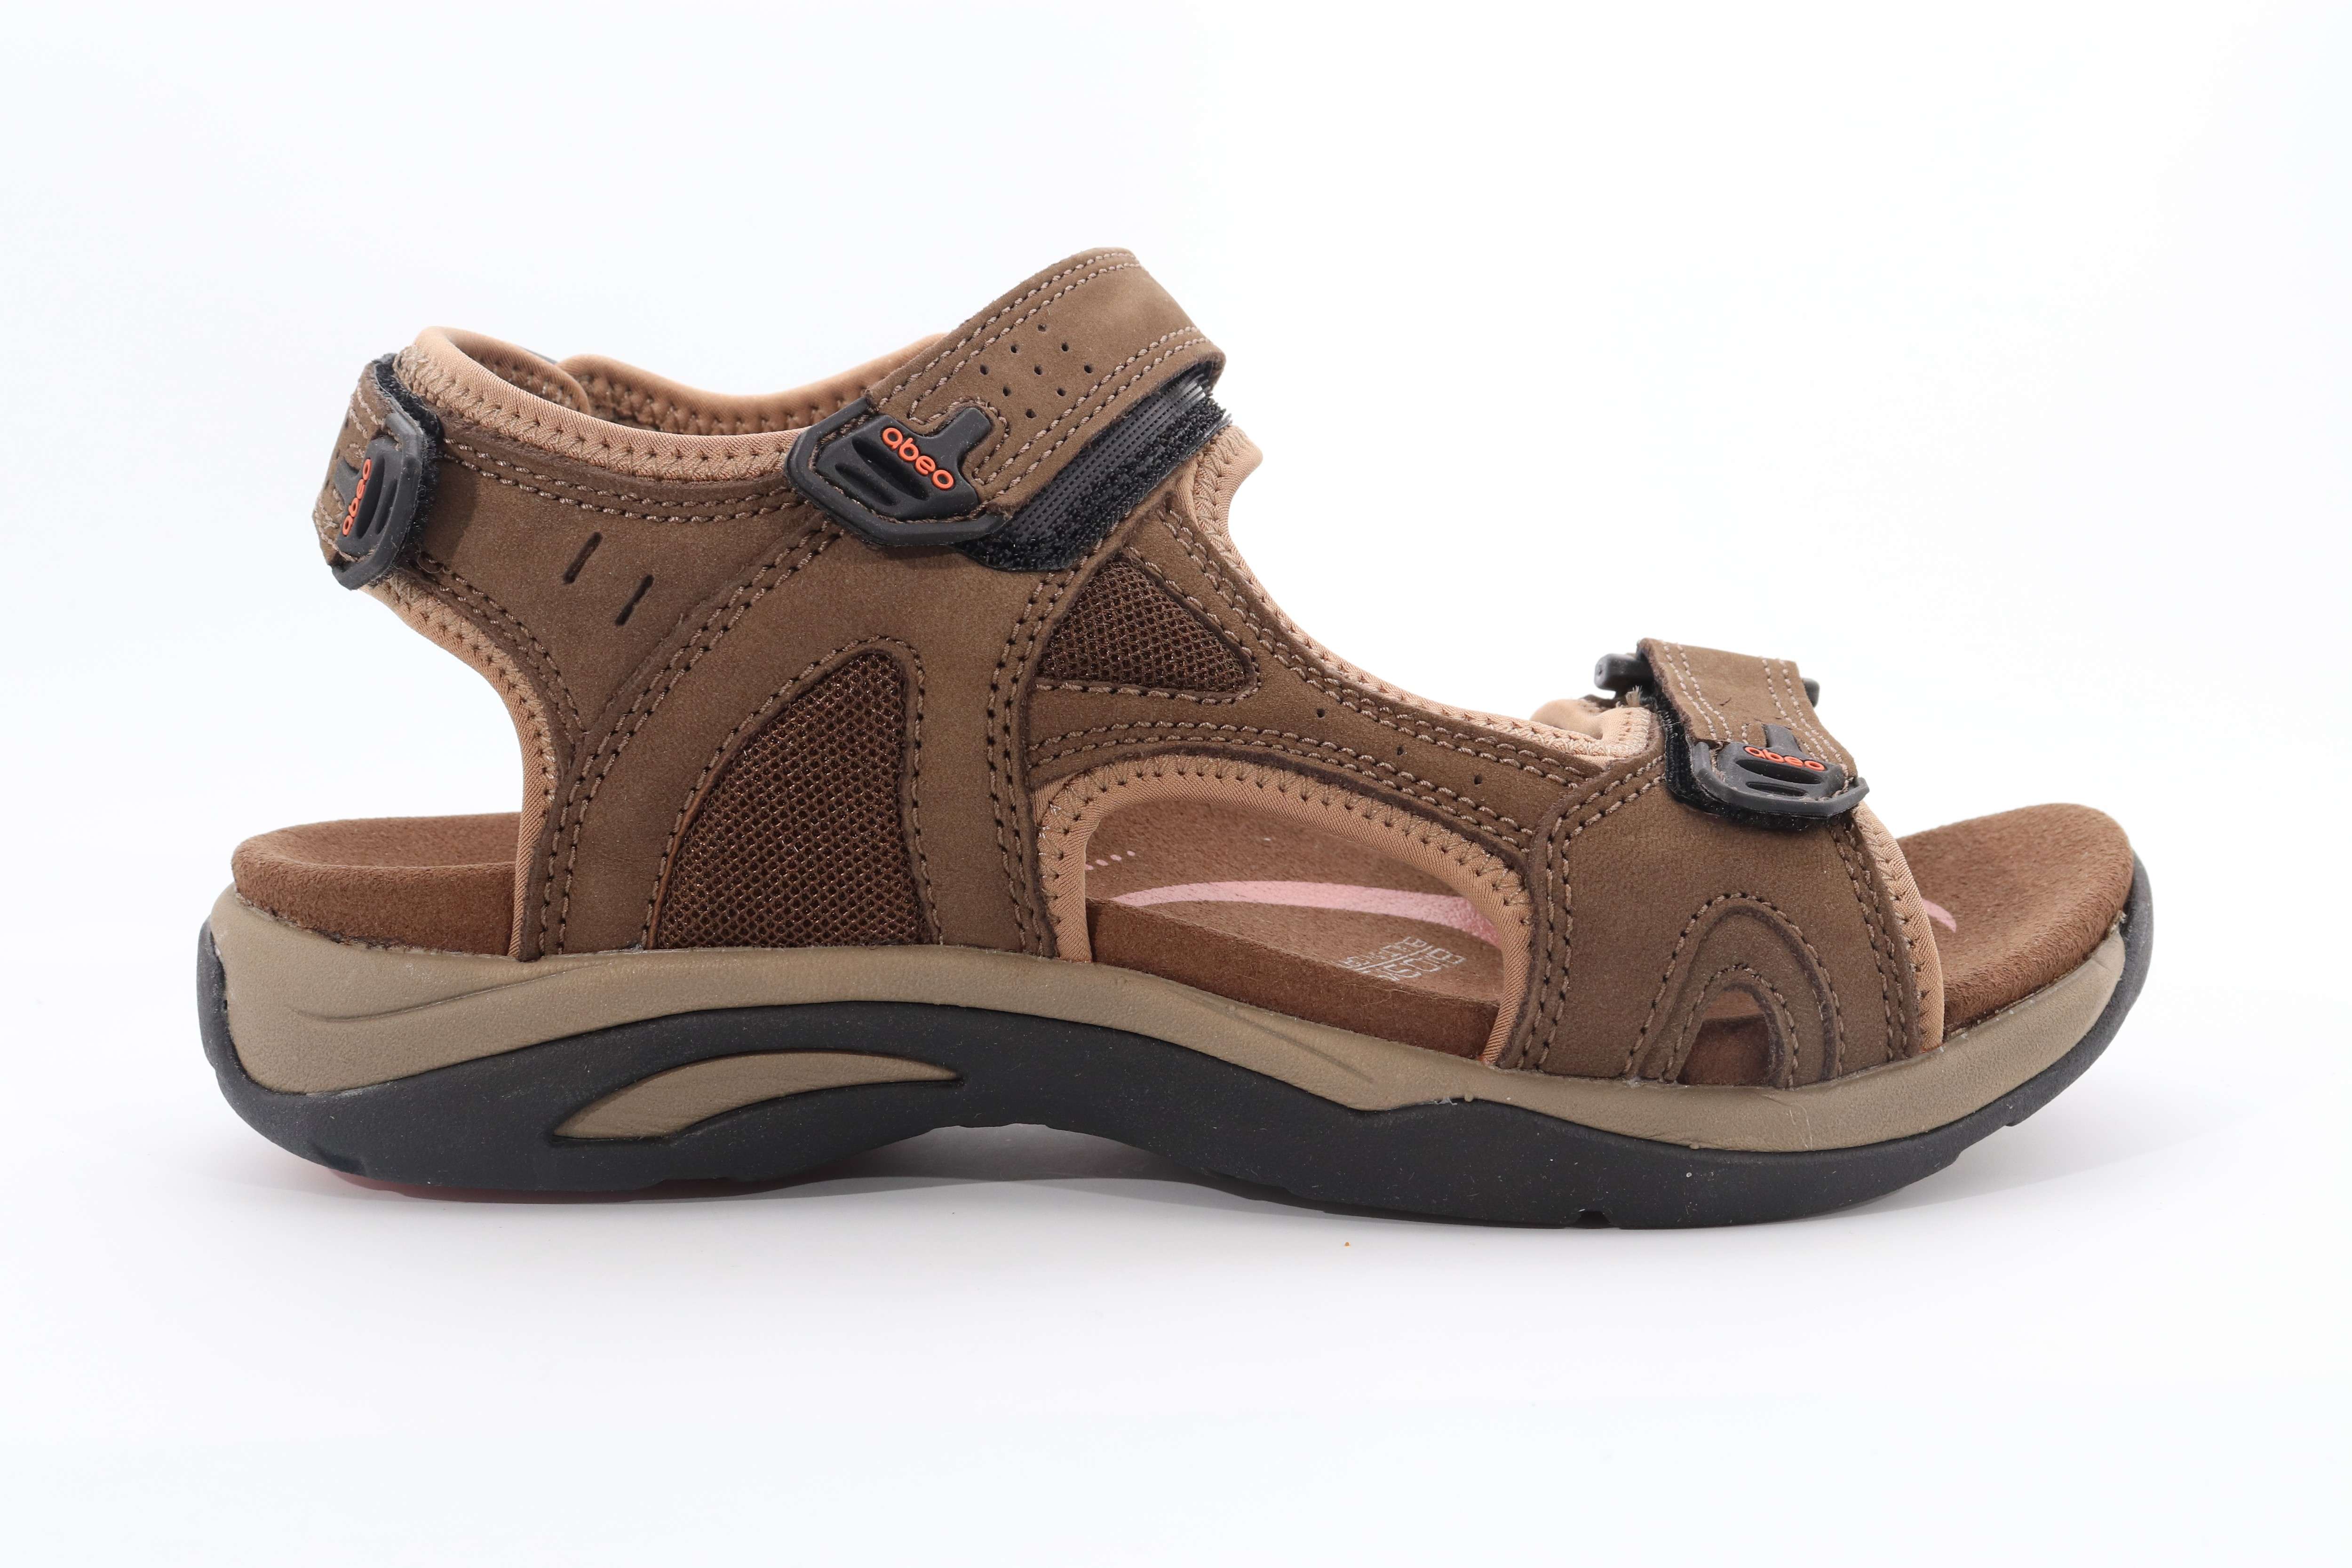 Abeo Huntington Sandals Brown Women's Size US 11 Neutral Footbed ( EPB ...